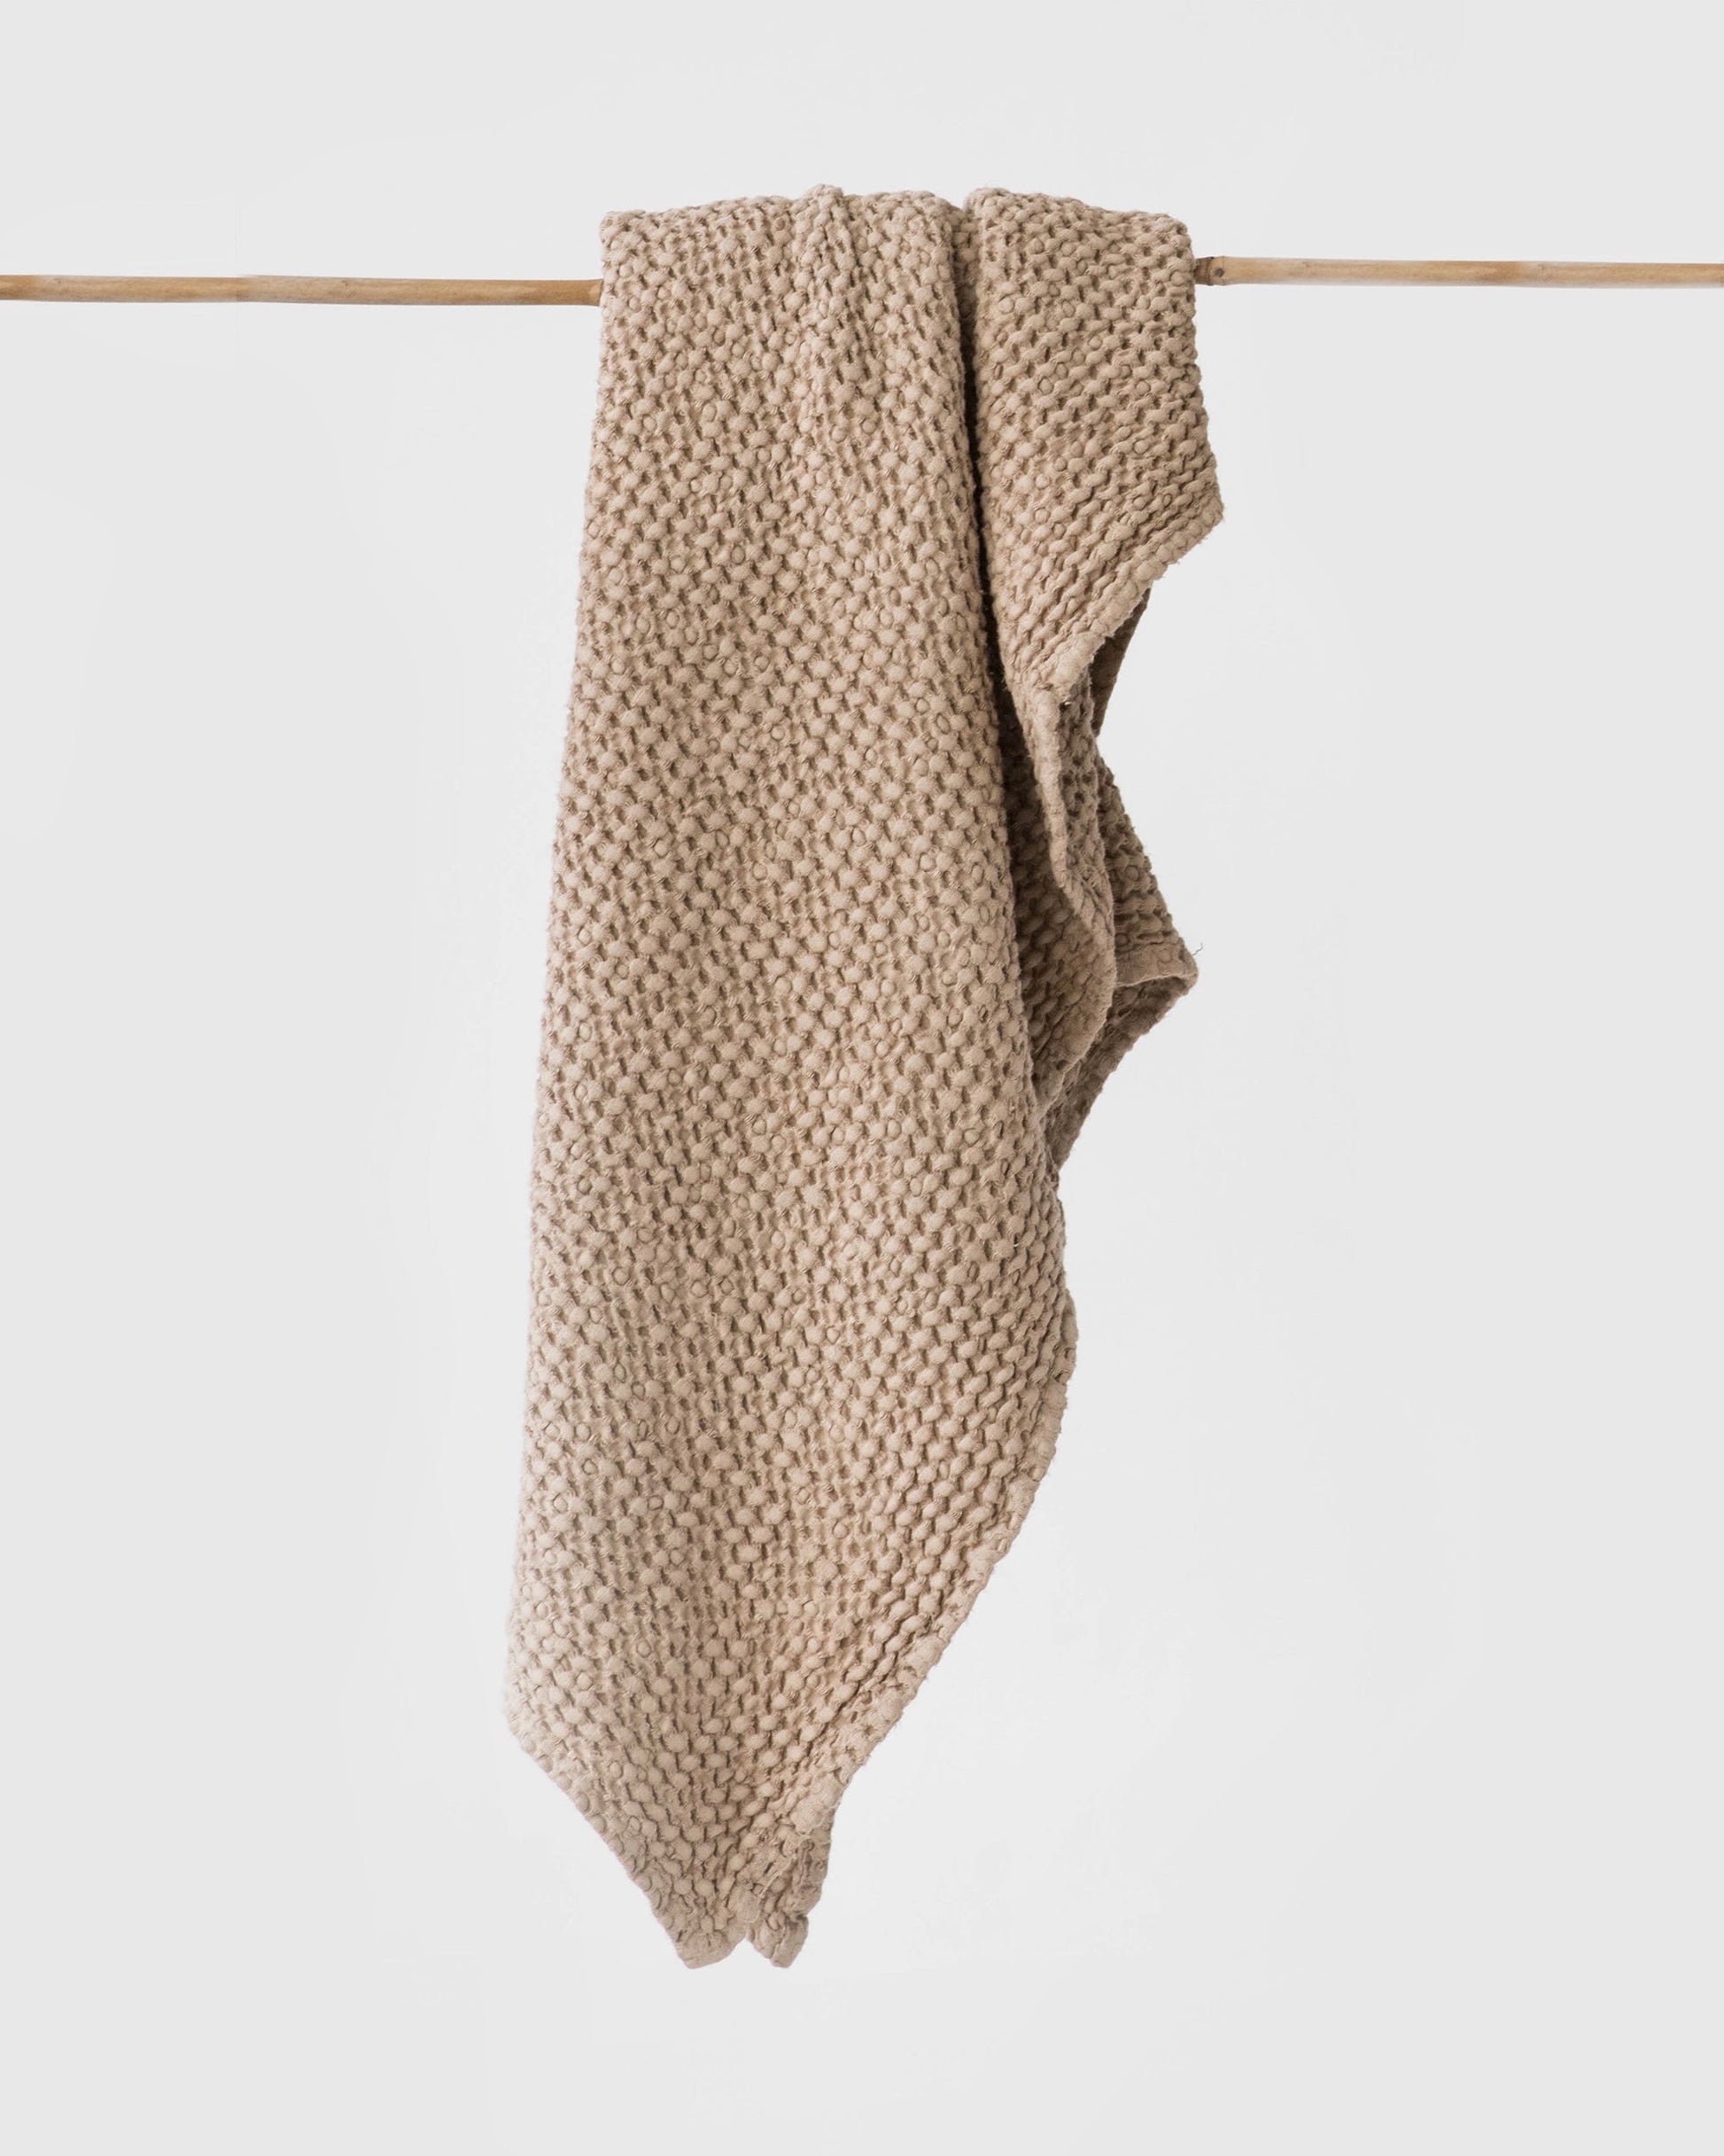 Click now to browse MagicLinen Waffle Bath Towel in Beige at Urban  Outfitters, hand towels waffle 